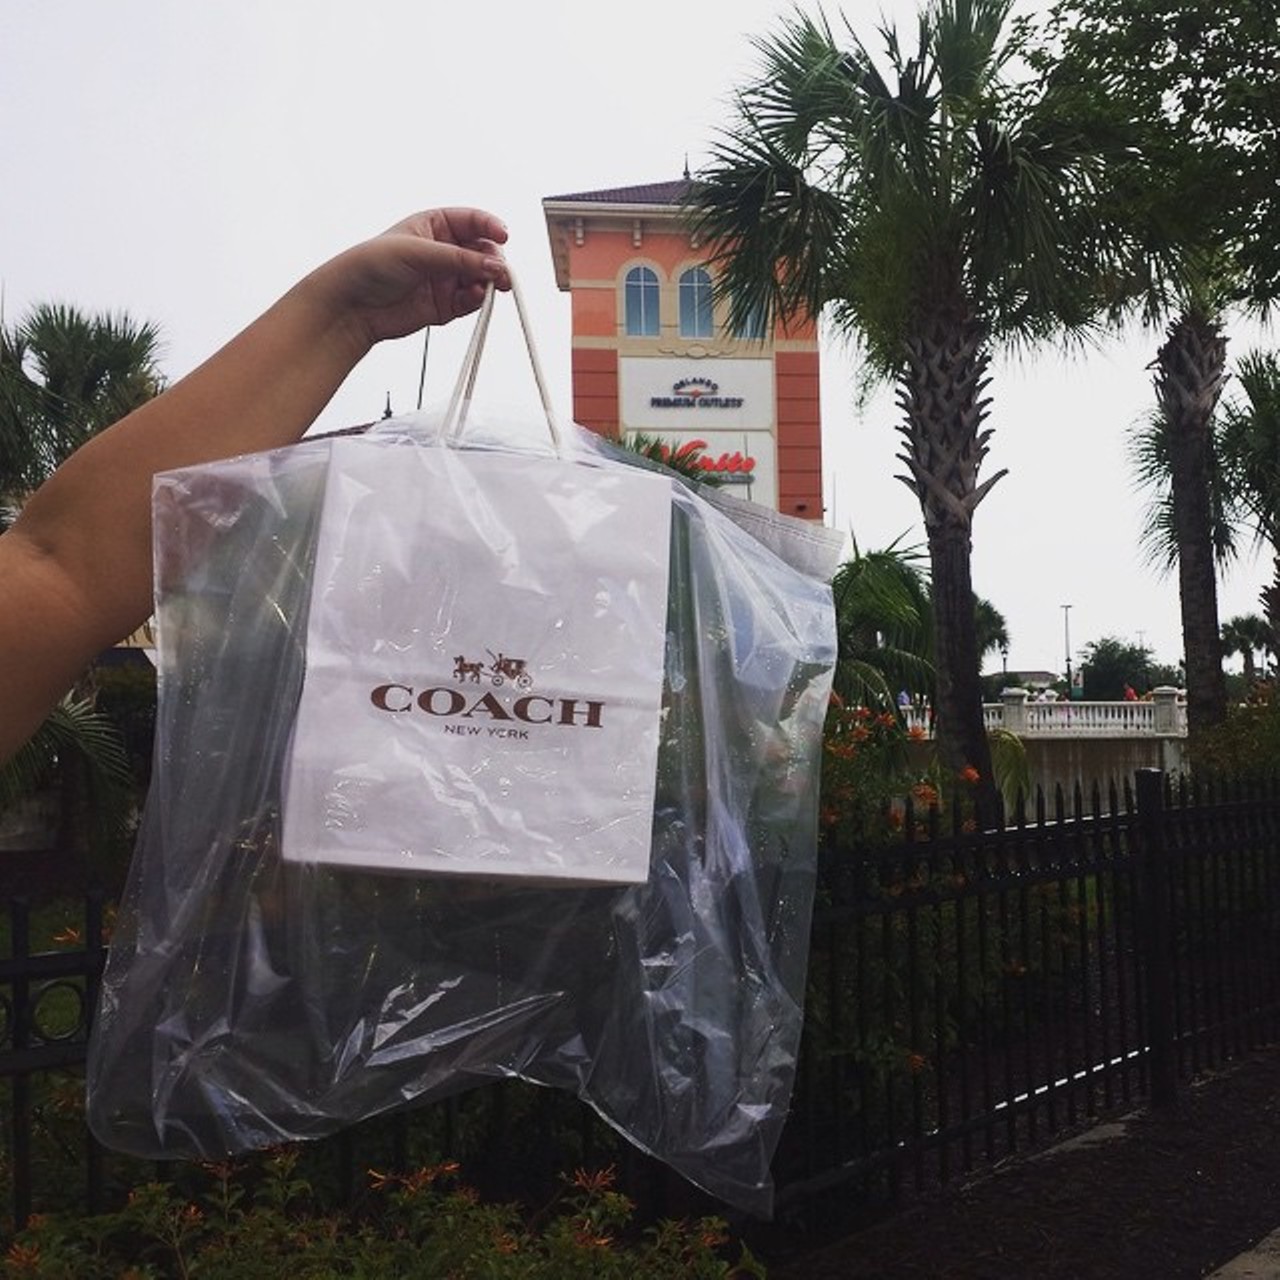 #onlyinorlando will they give you a poncho for your shopping bag. Instagram: inspiredappetit